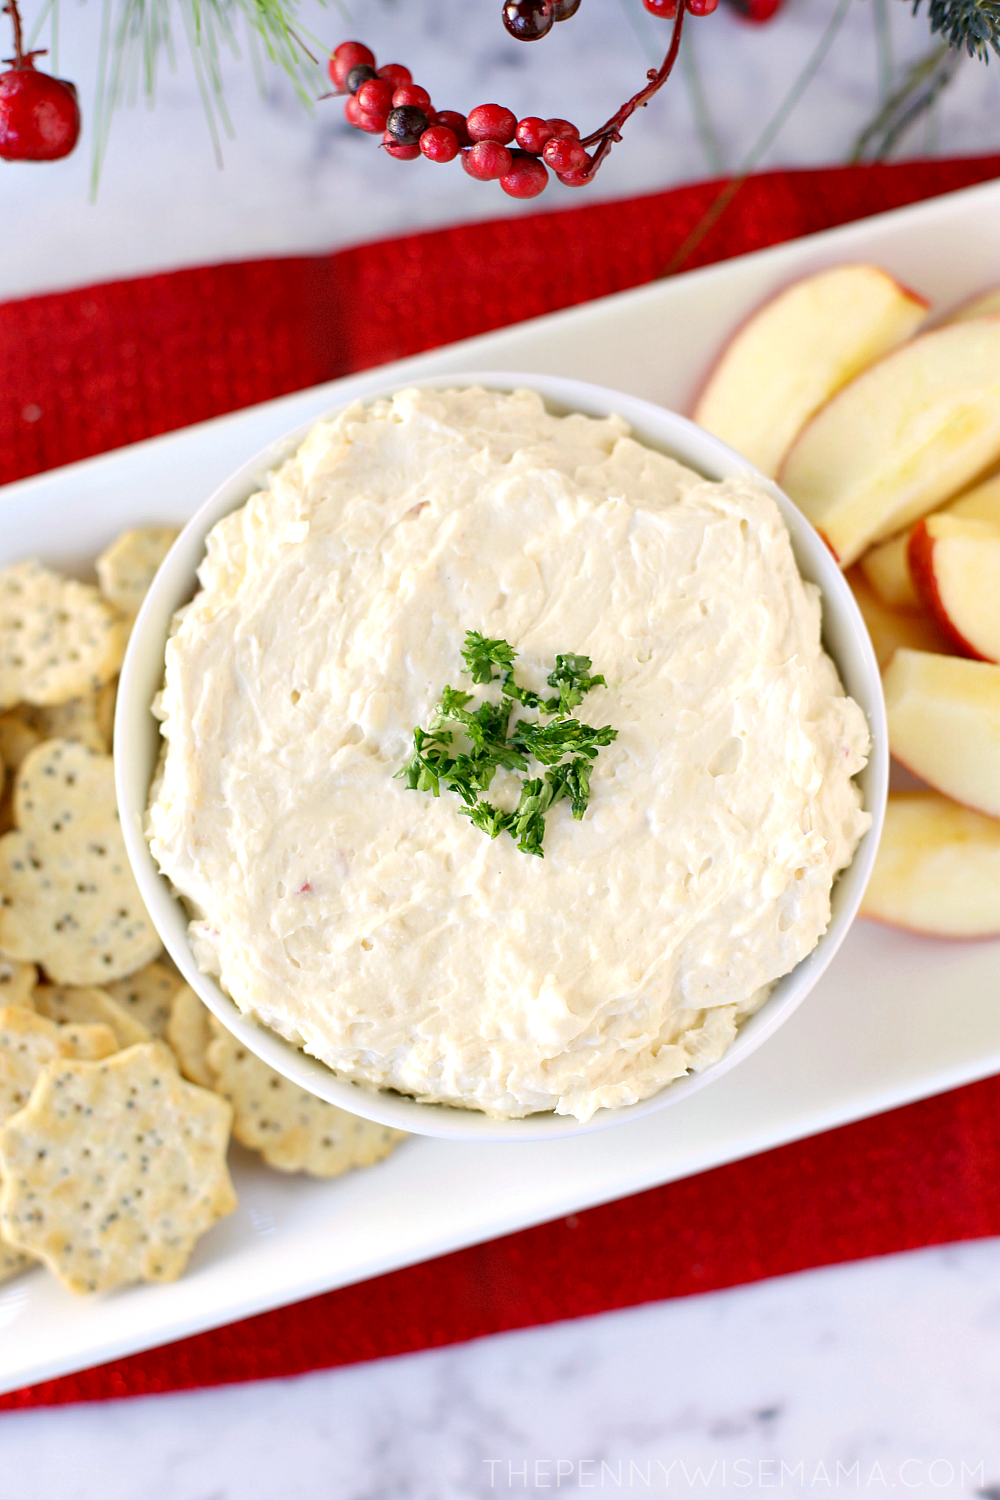 This Apple Cinnamon Cheddar Cheese Dip is a fun and unique twist on your classic cheddar cheese dip. Simple to make and full of flavor, it’s perfect for holiday parties or get-togethers. Serve with your favorite crackers, pretzels, or apple slices and watch it disappear!